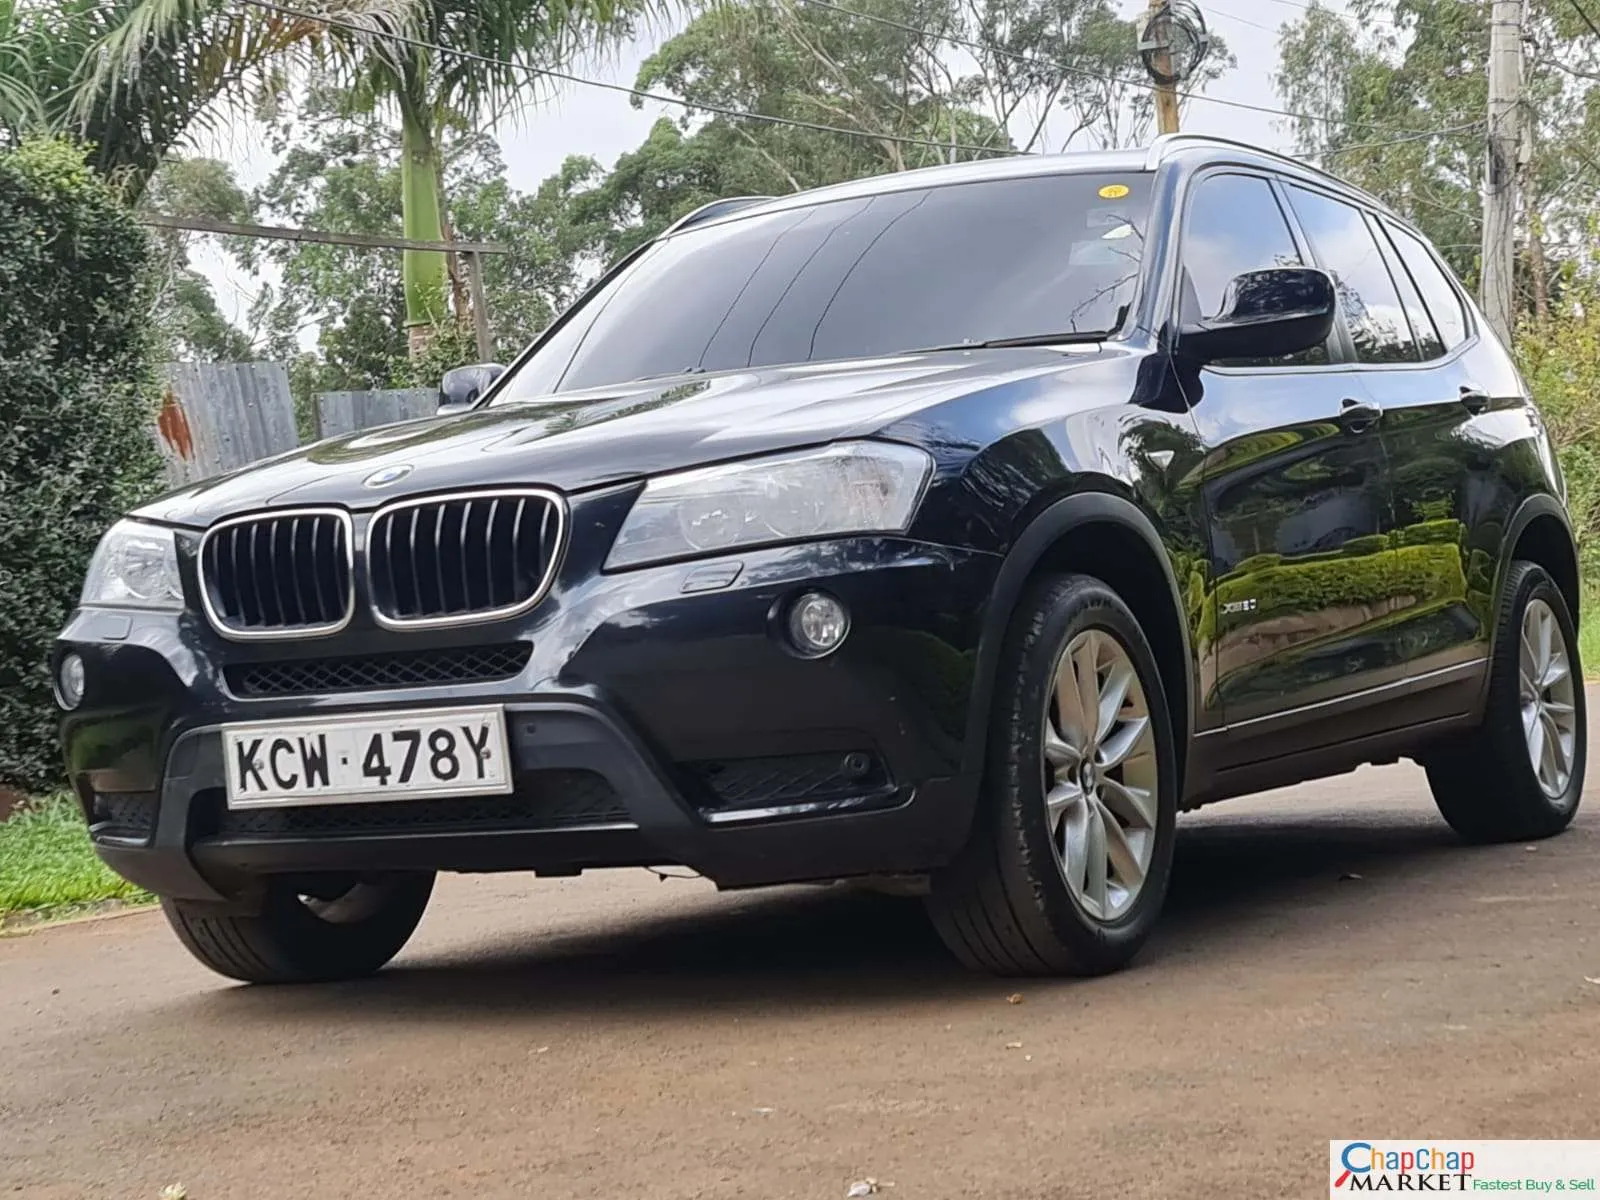 Bmw X3 for sale in Kenya Fully Loaded 🔥 You Pay 30% deposit Trade in Ok EXCLUSIVE